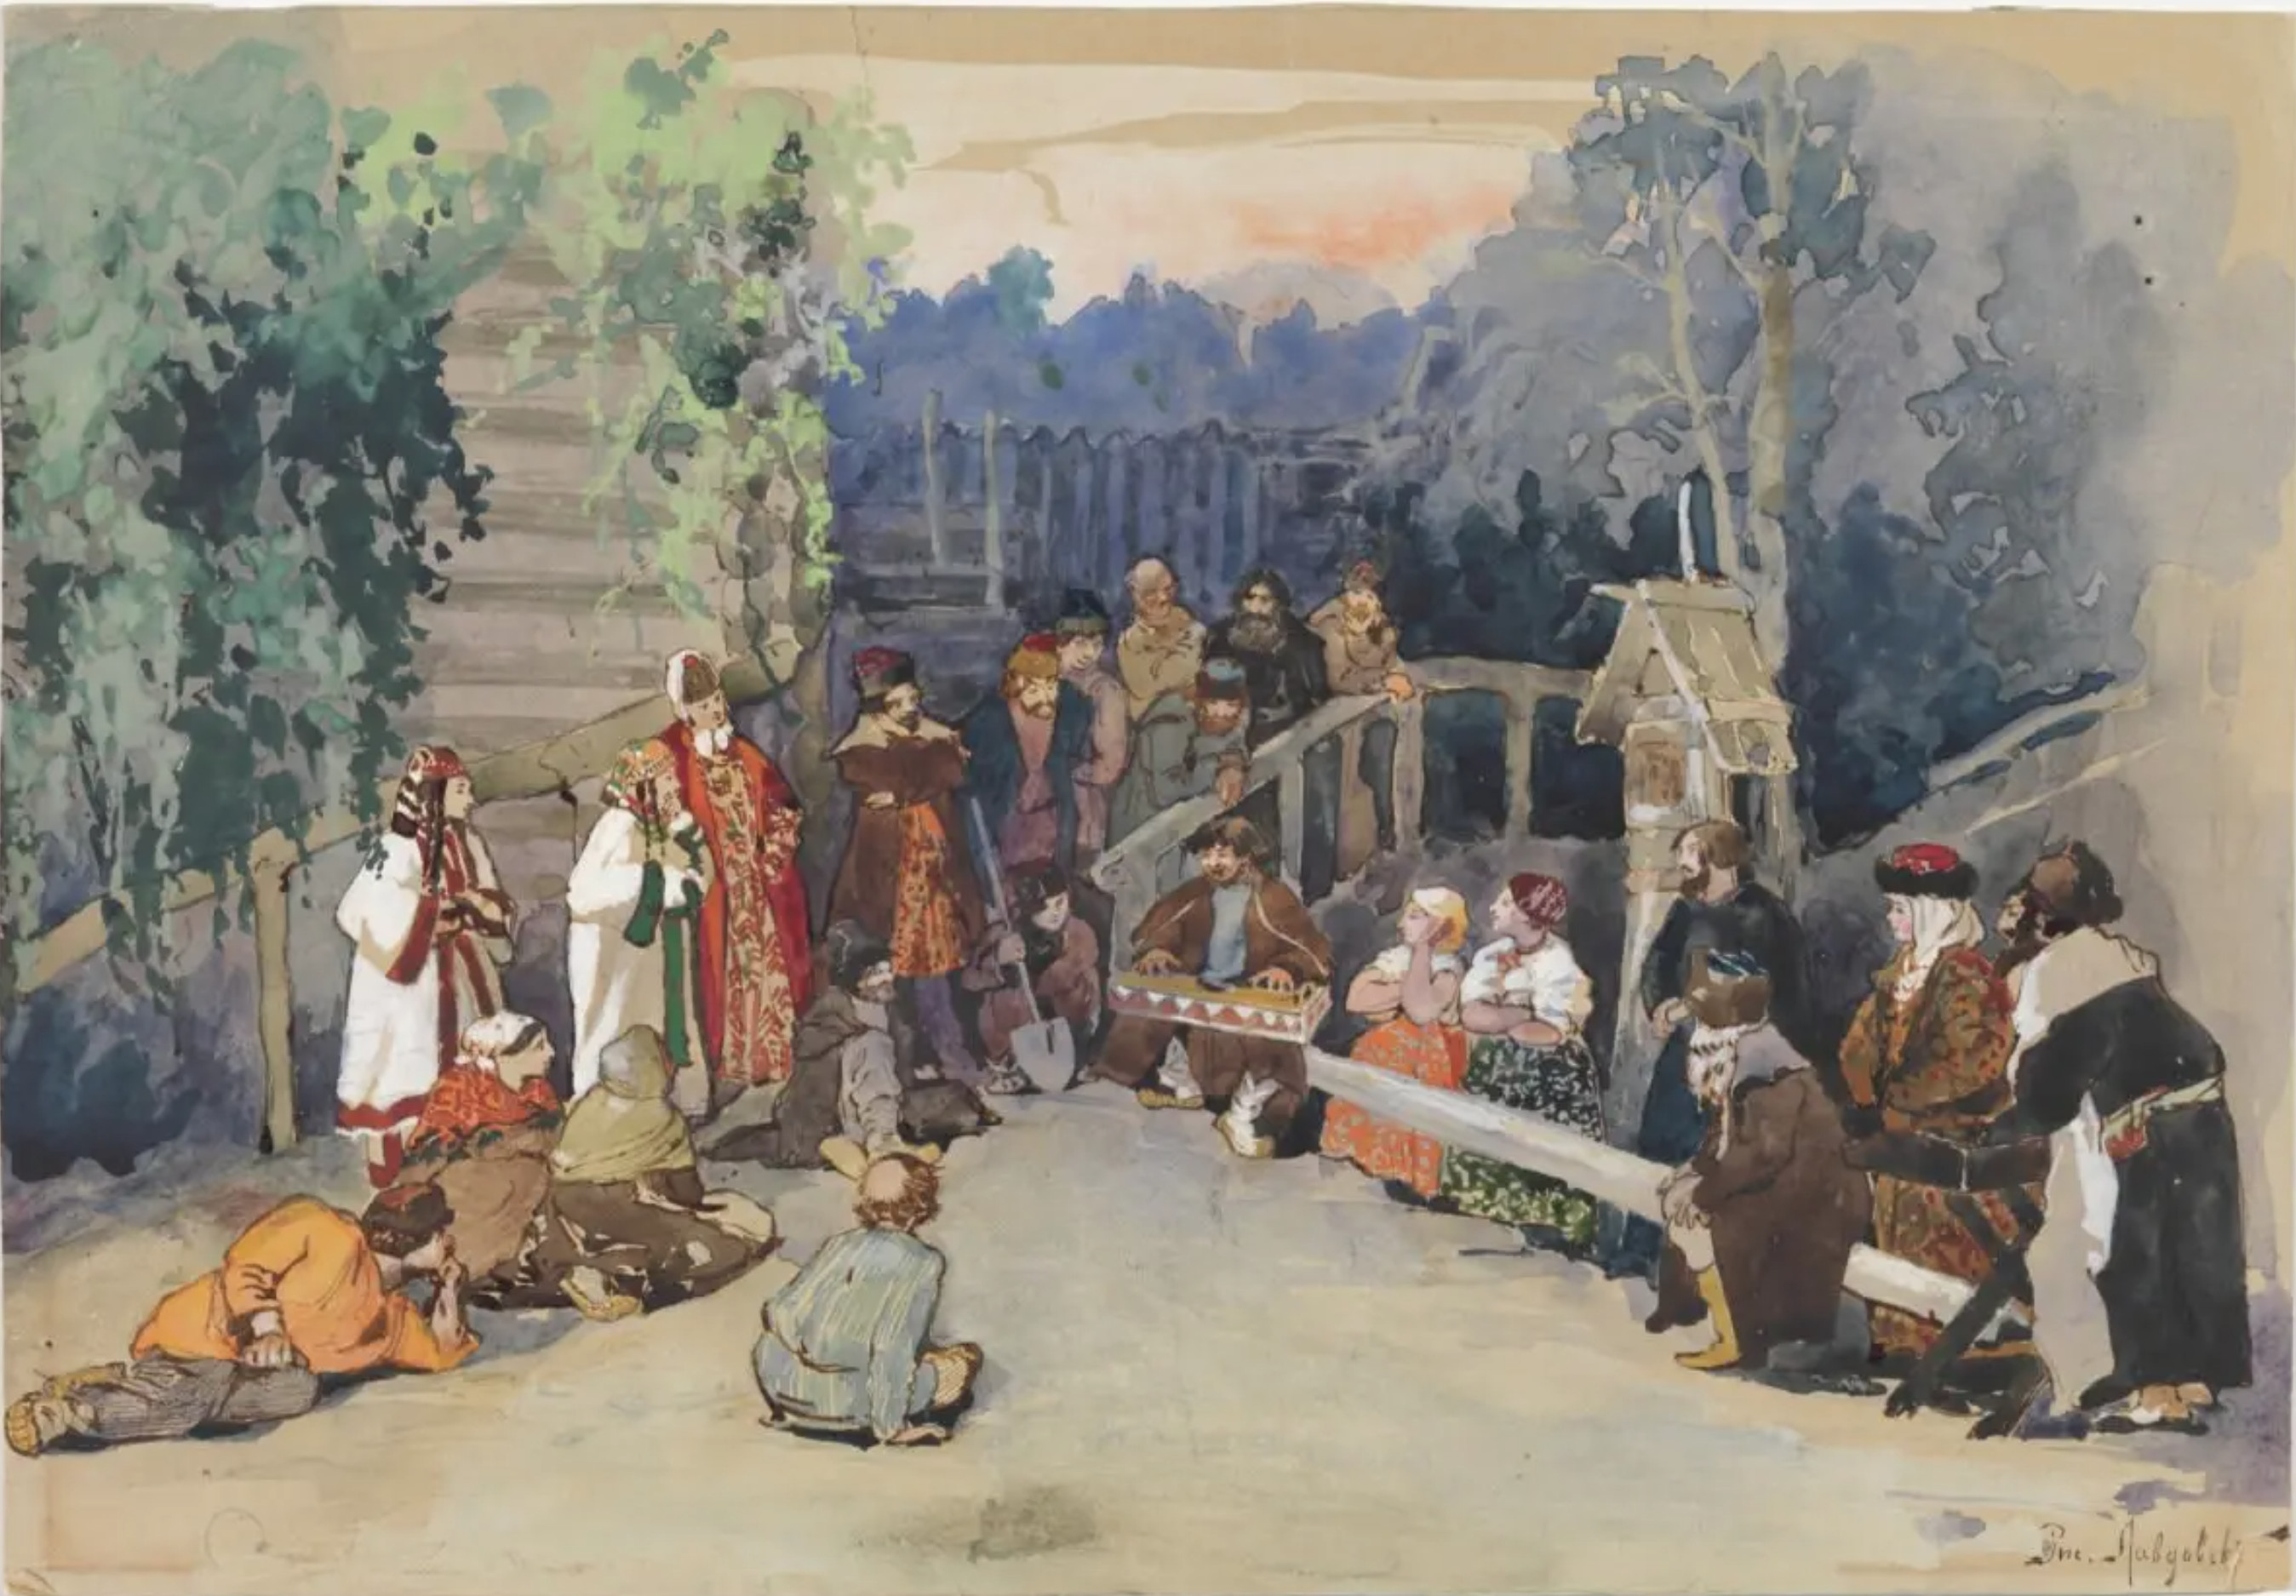 village scene with performers by f. lavdovskii